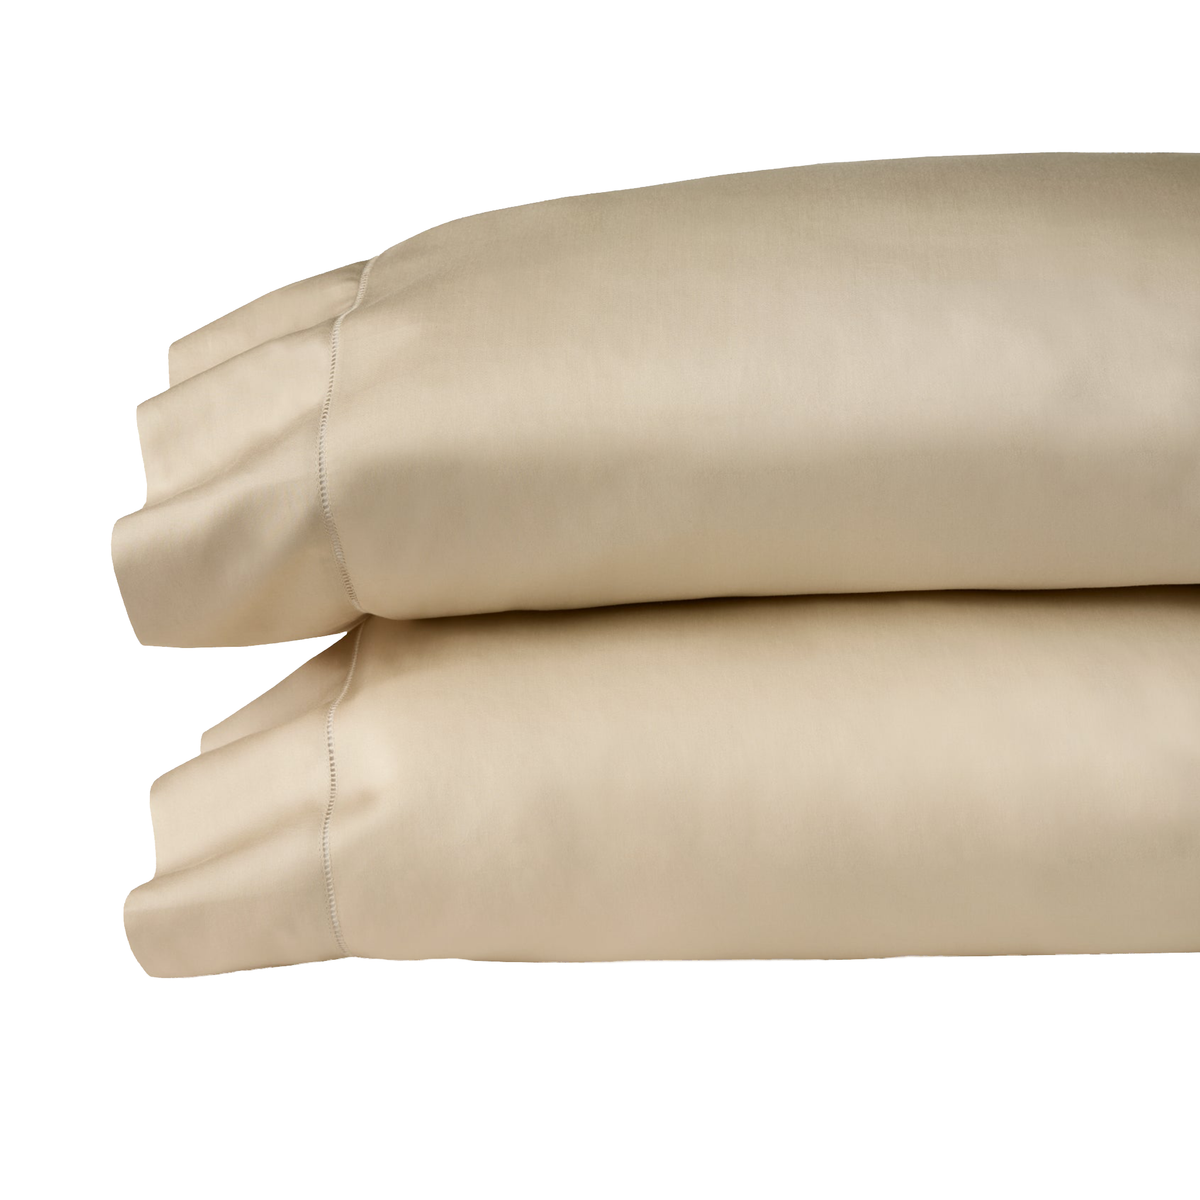 Pair of Pillowcases of Sferra Fiona Bedding in Sand Color